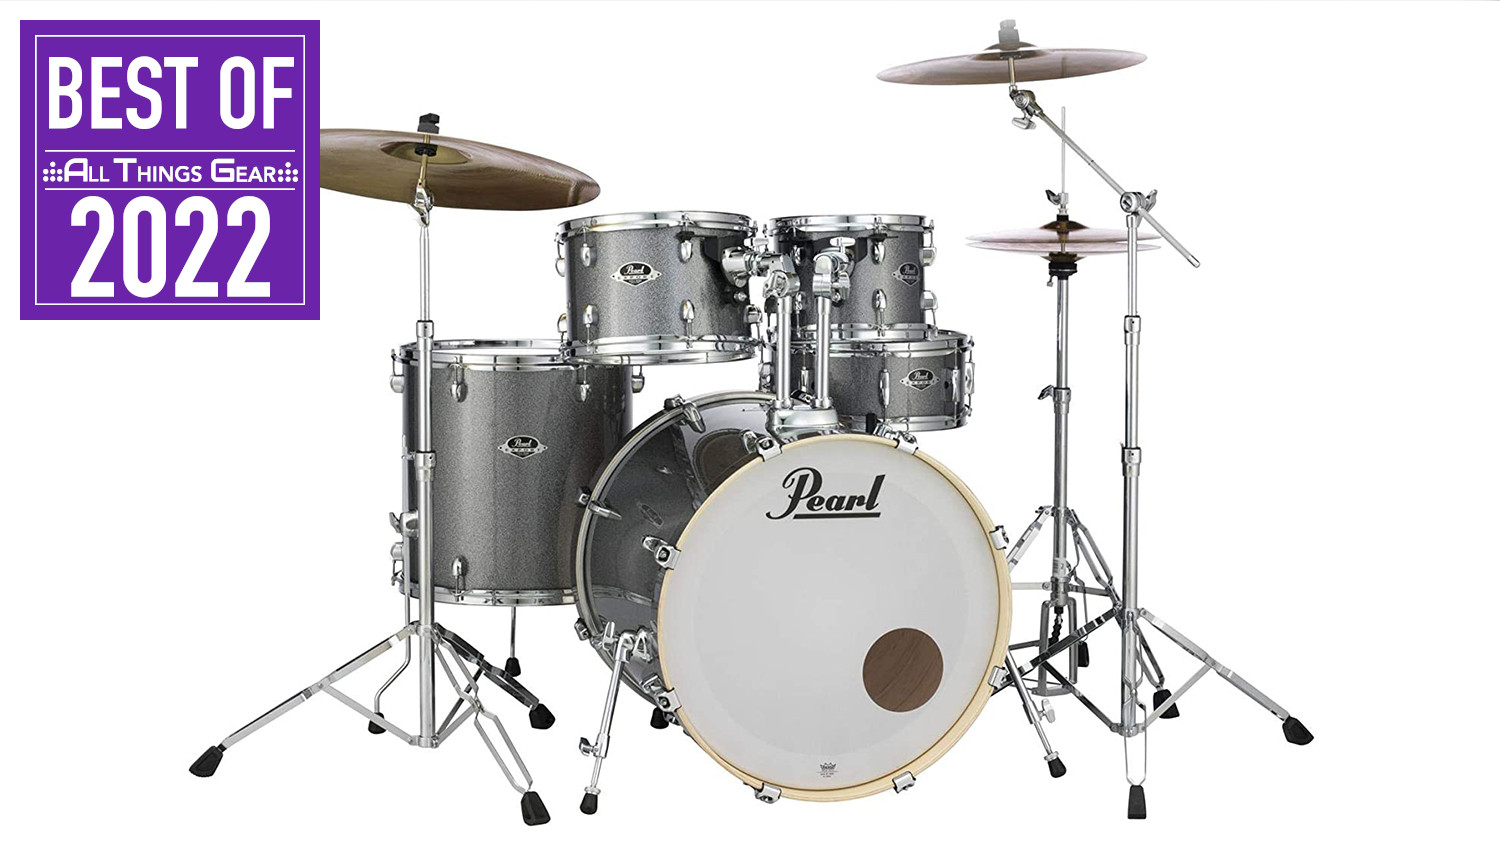 Pearl Export EXX drum kit on a white background